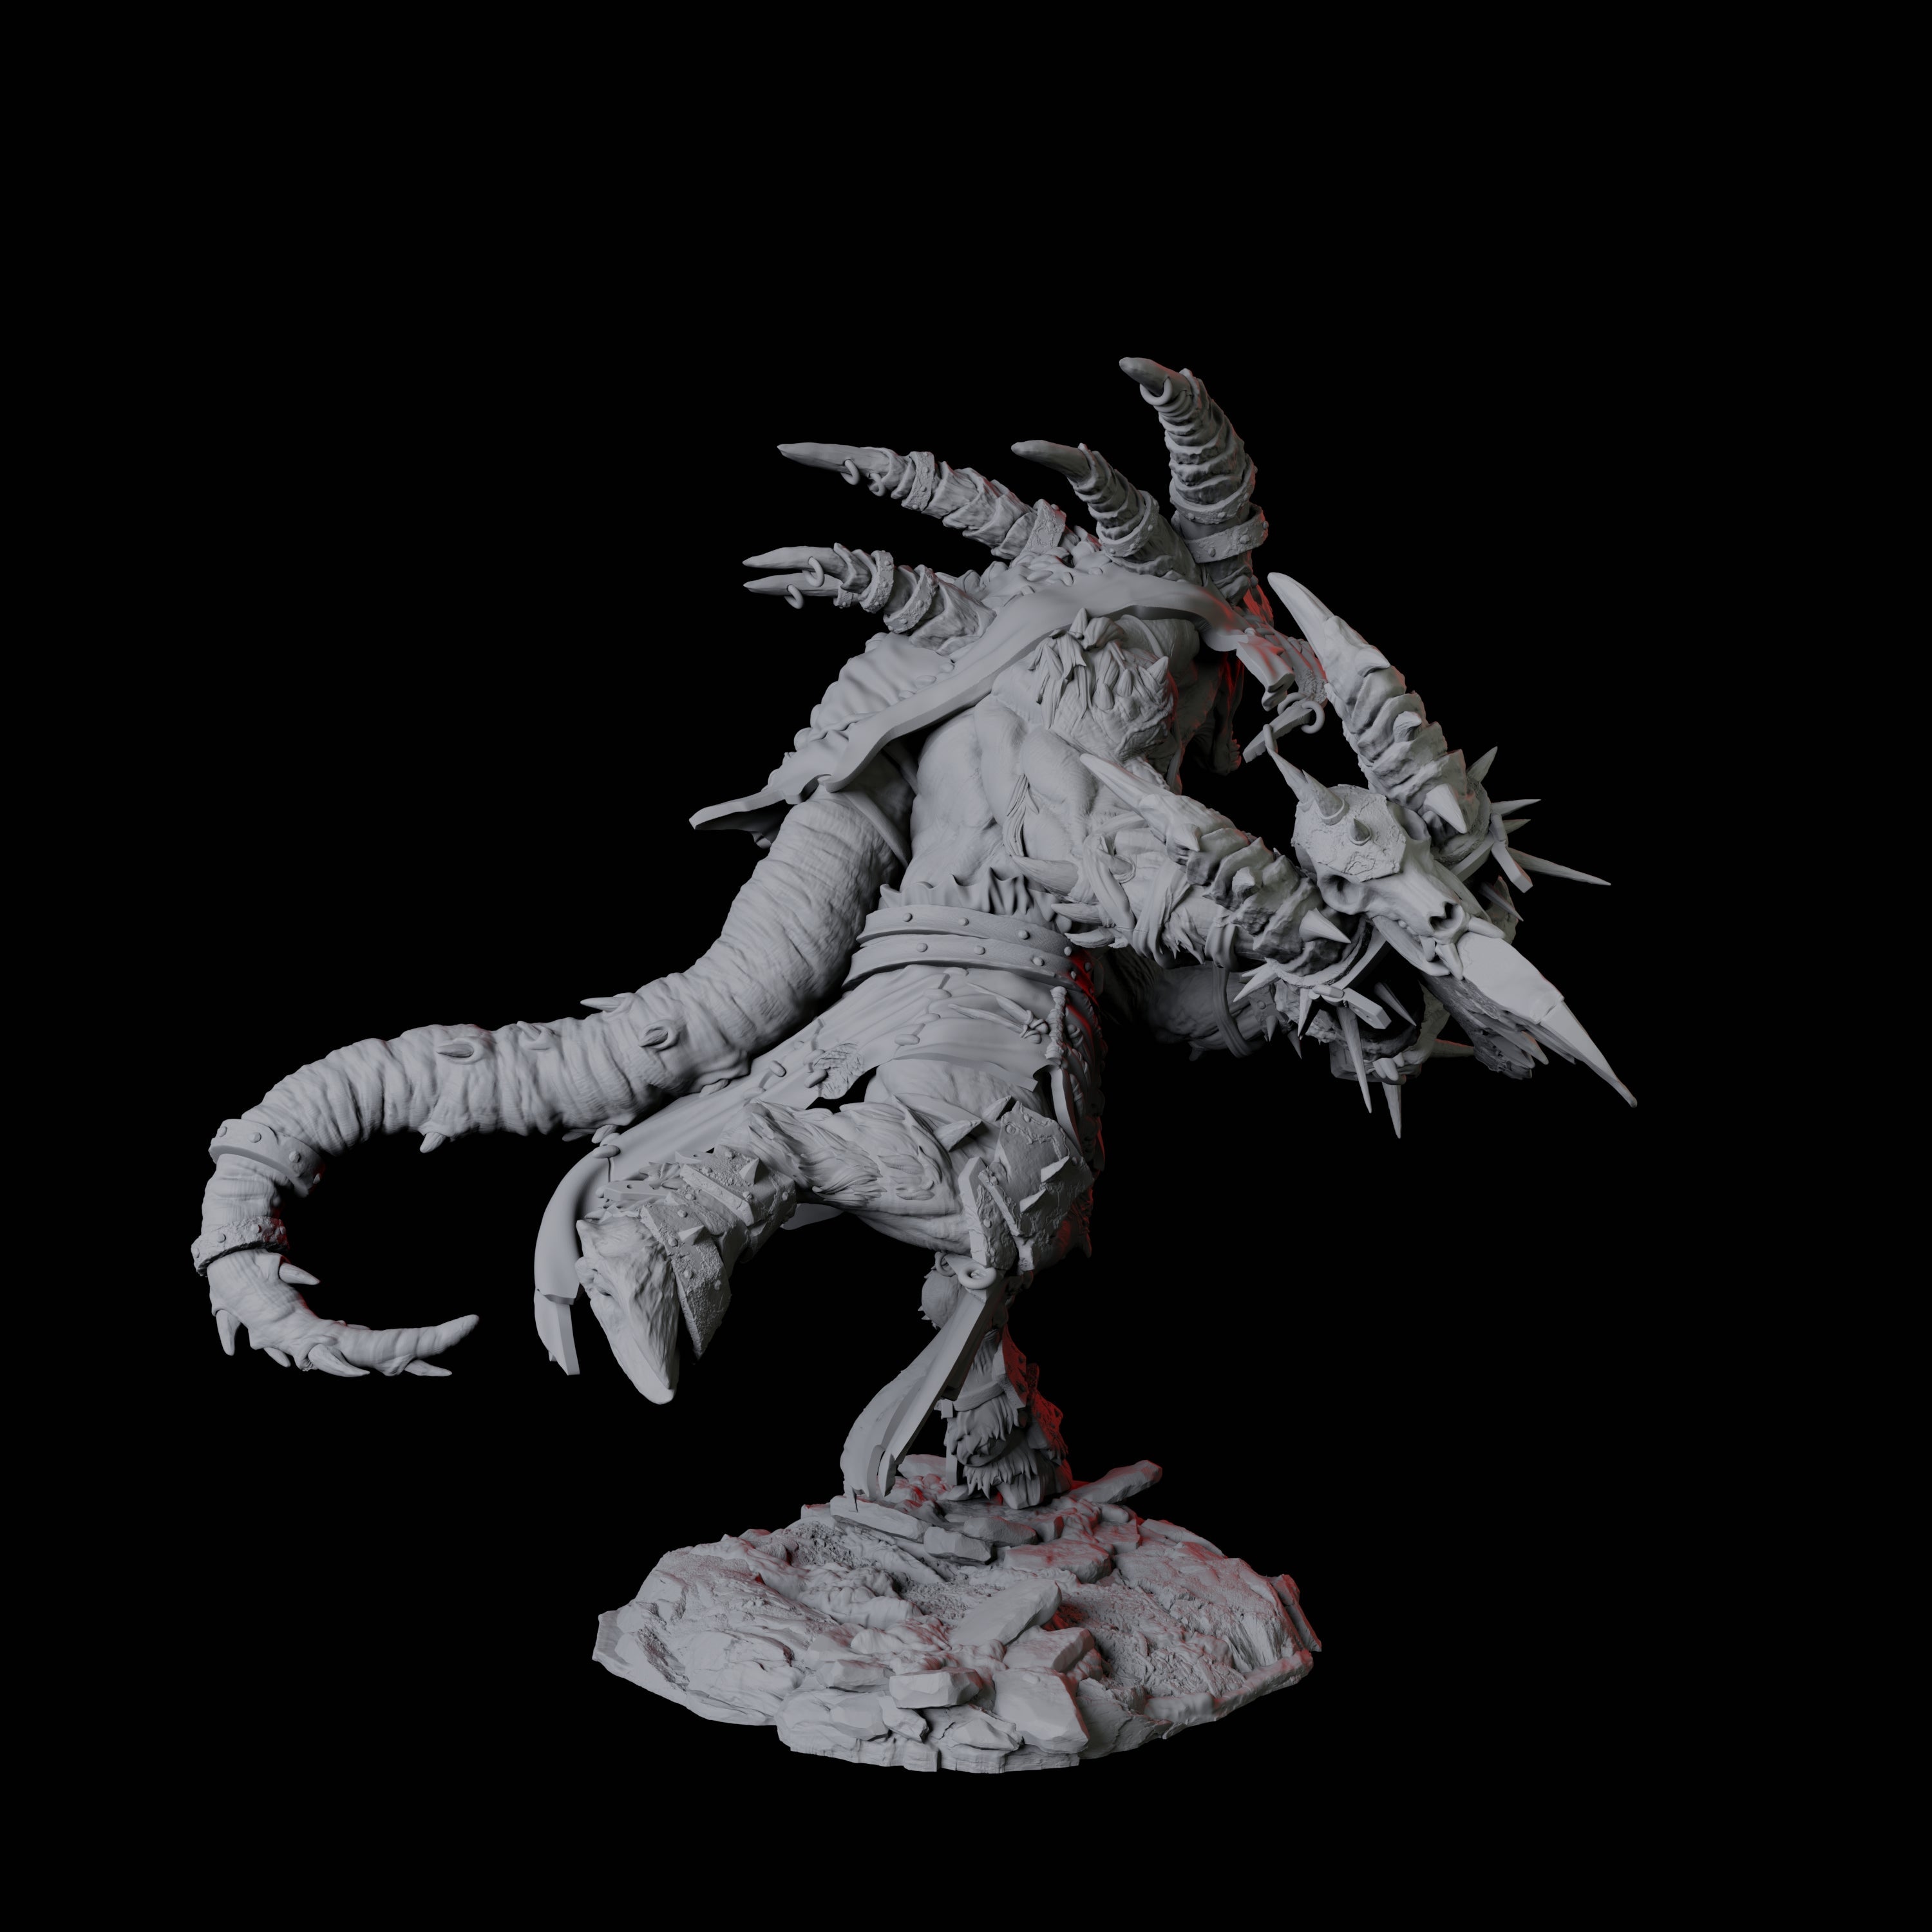 Giant Ratfolk Barbarian A Miniature for Dungeons and Dragons, Pathfinder or other TTRPGs